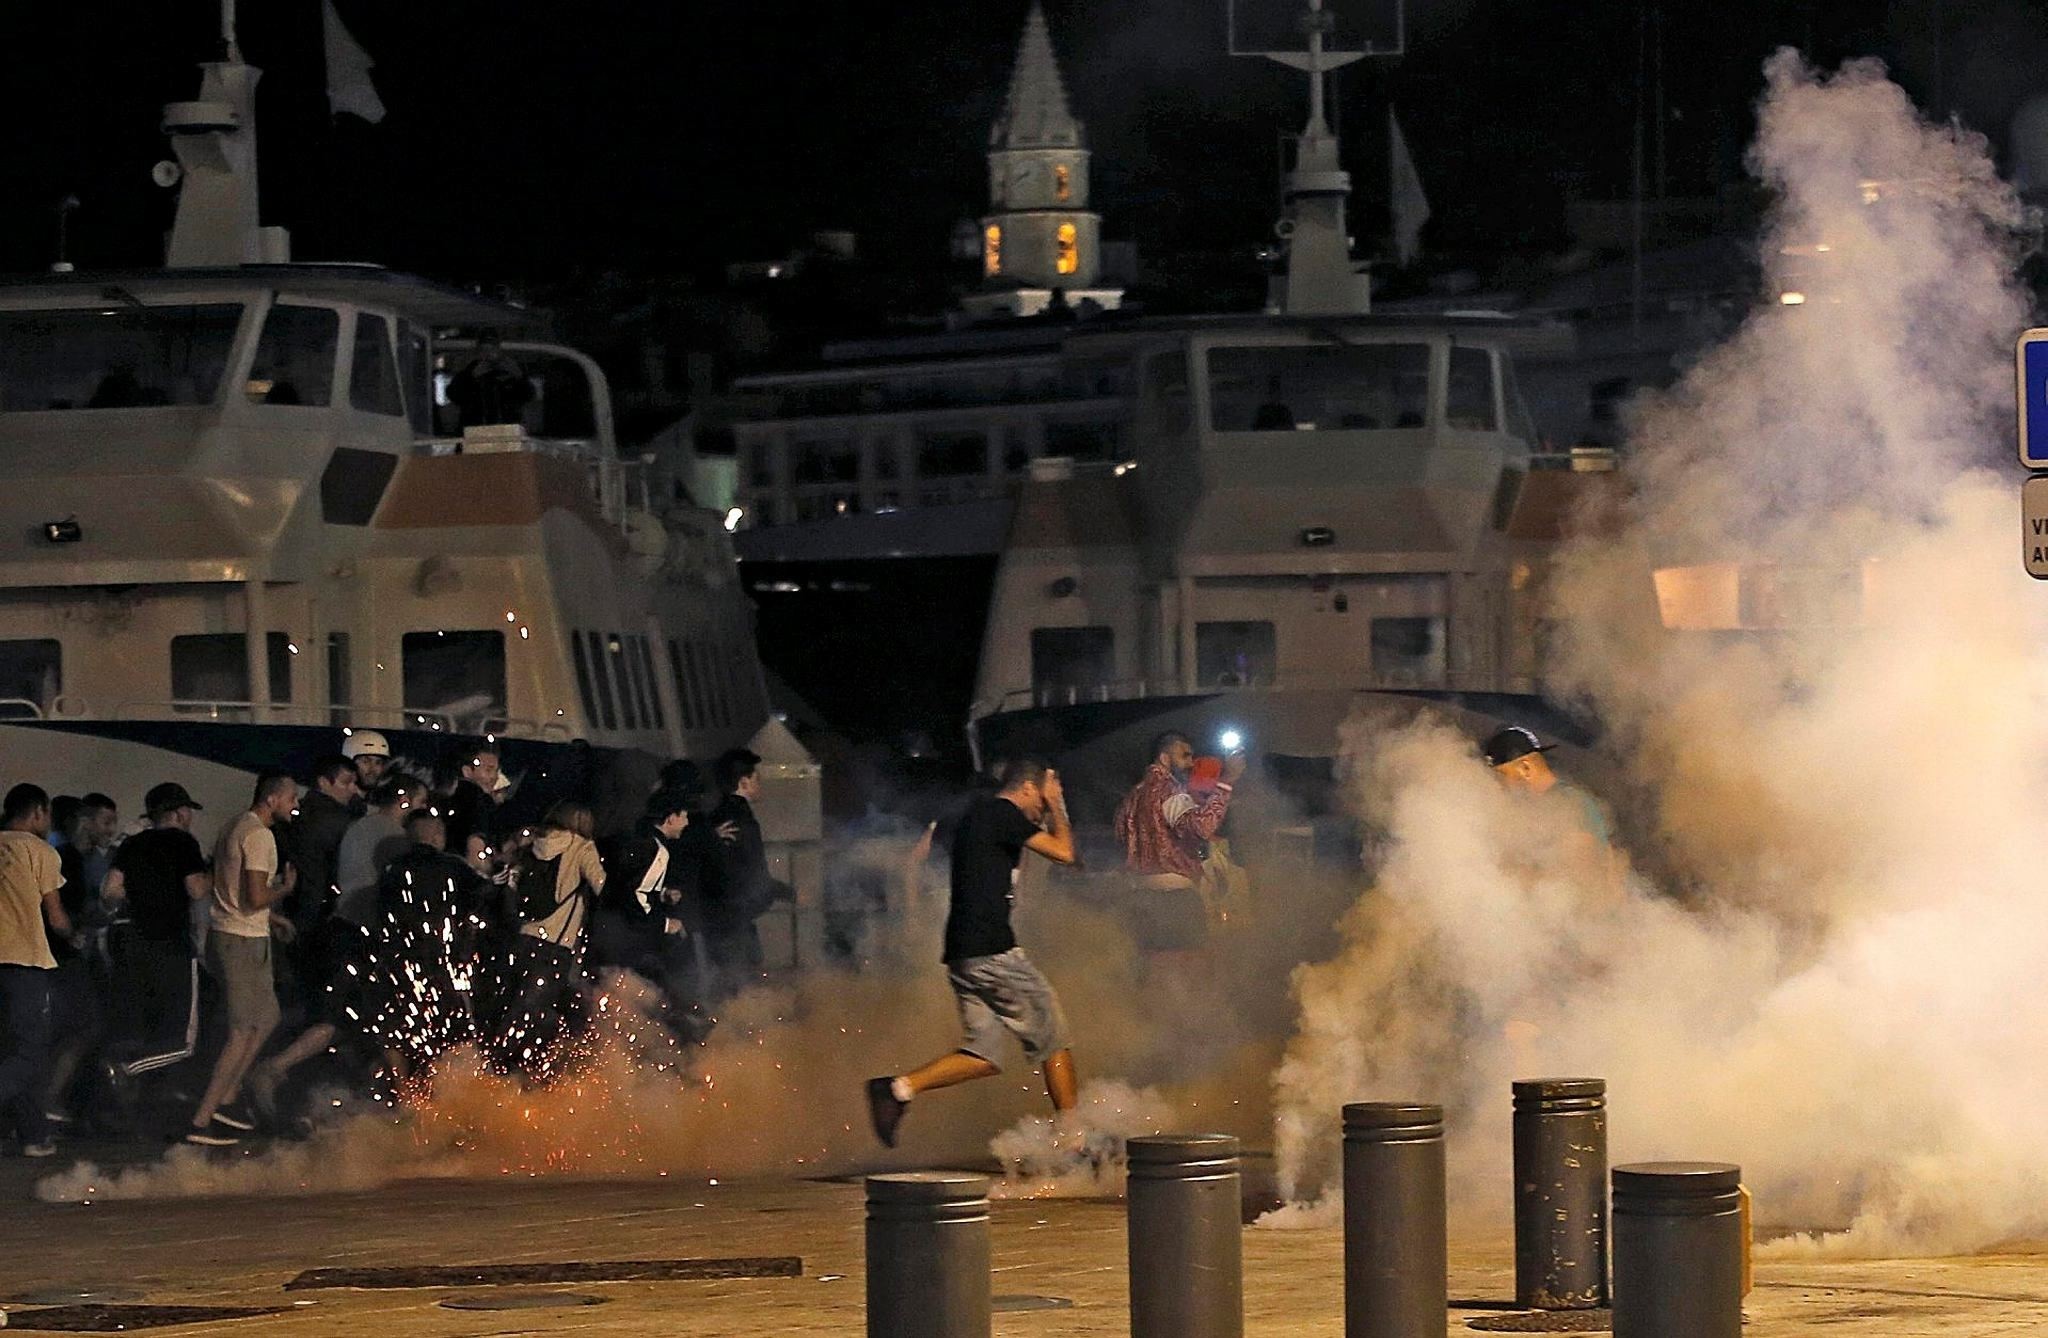  Police disperse revellers at the old port of Marseille after the England v Russia - Group B match. (Reuters Photo)